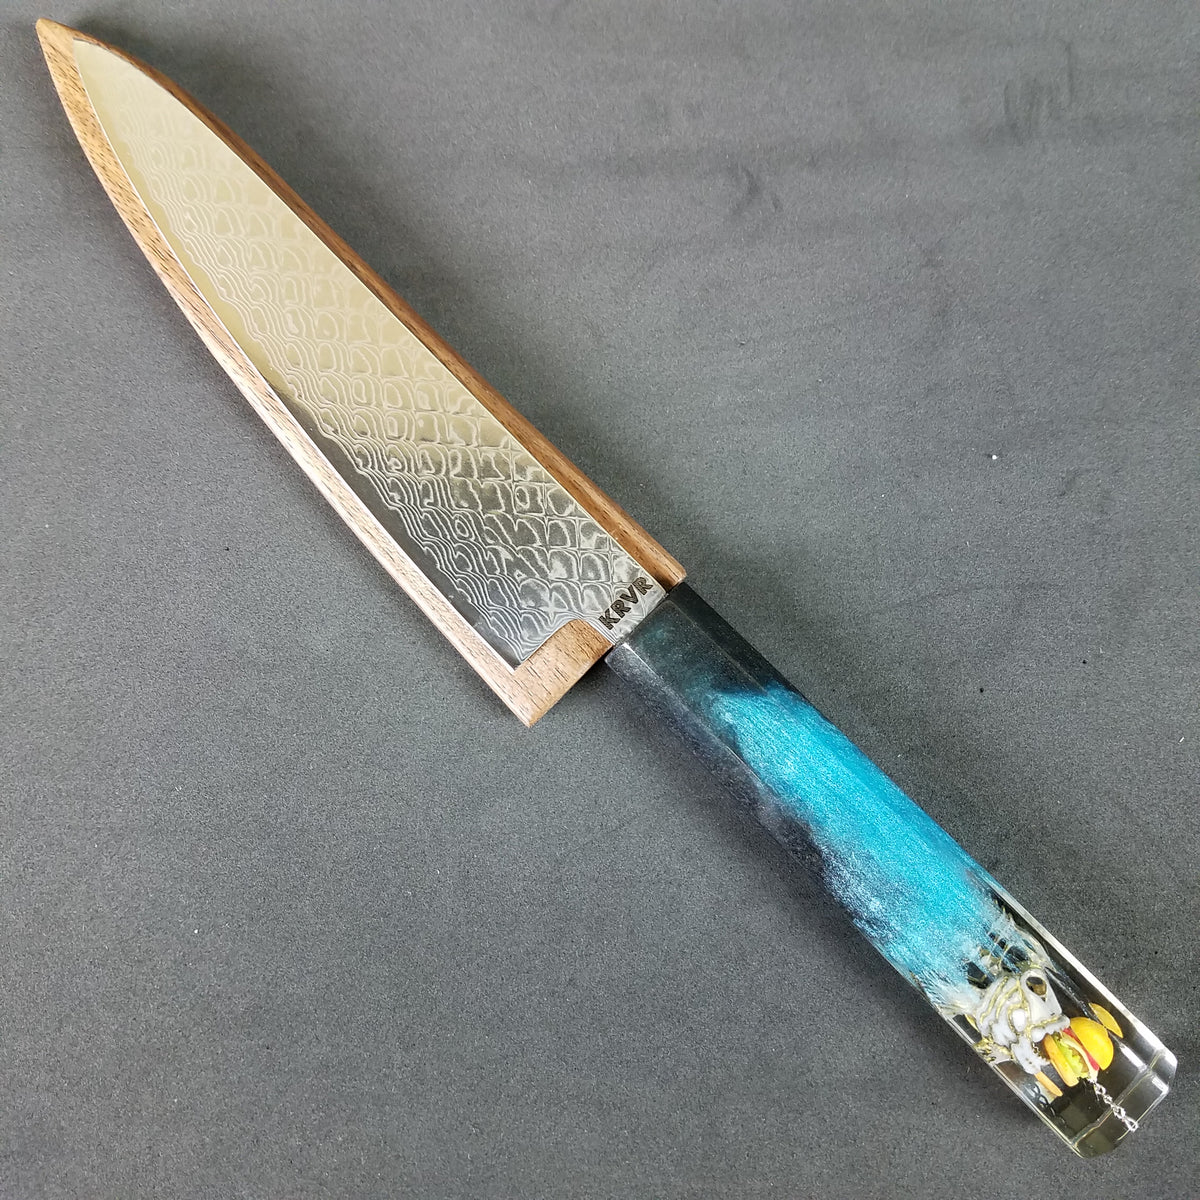 Catch of the Year - 6in (150mm) Damascus Petty Culinary Knife